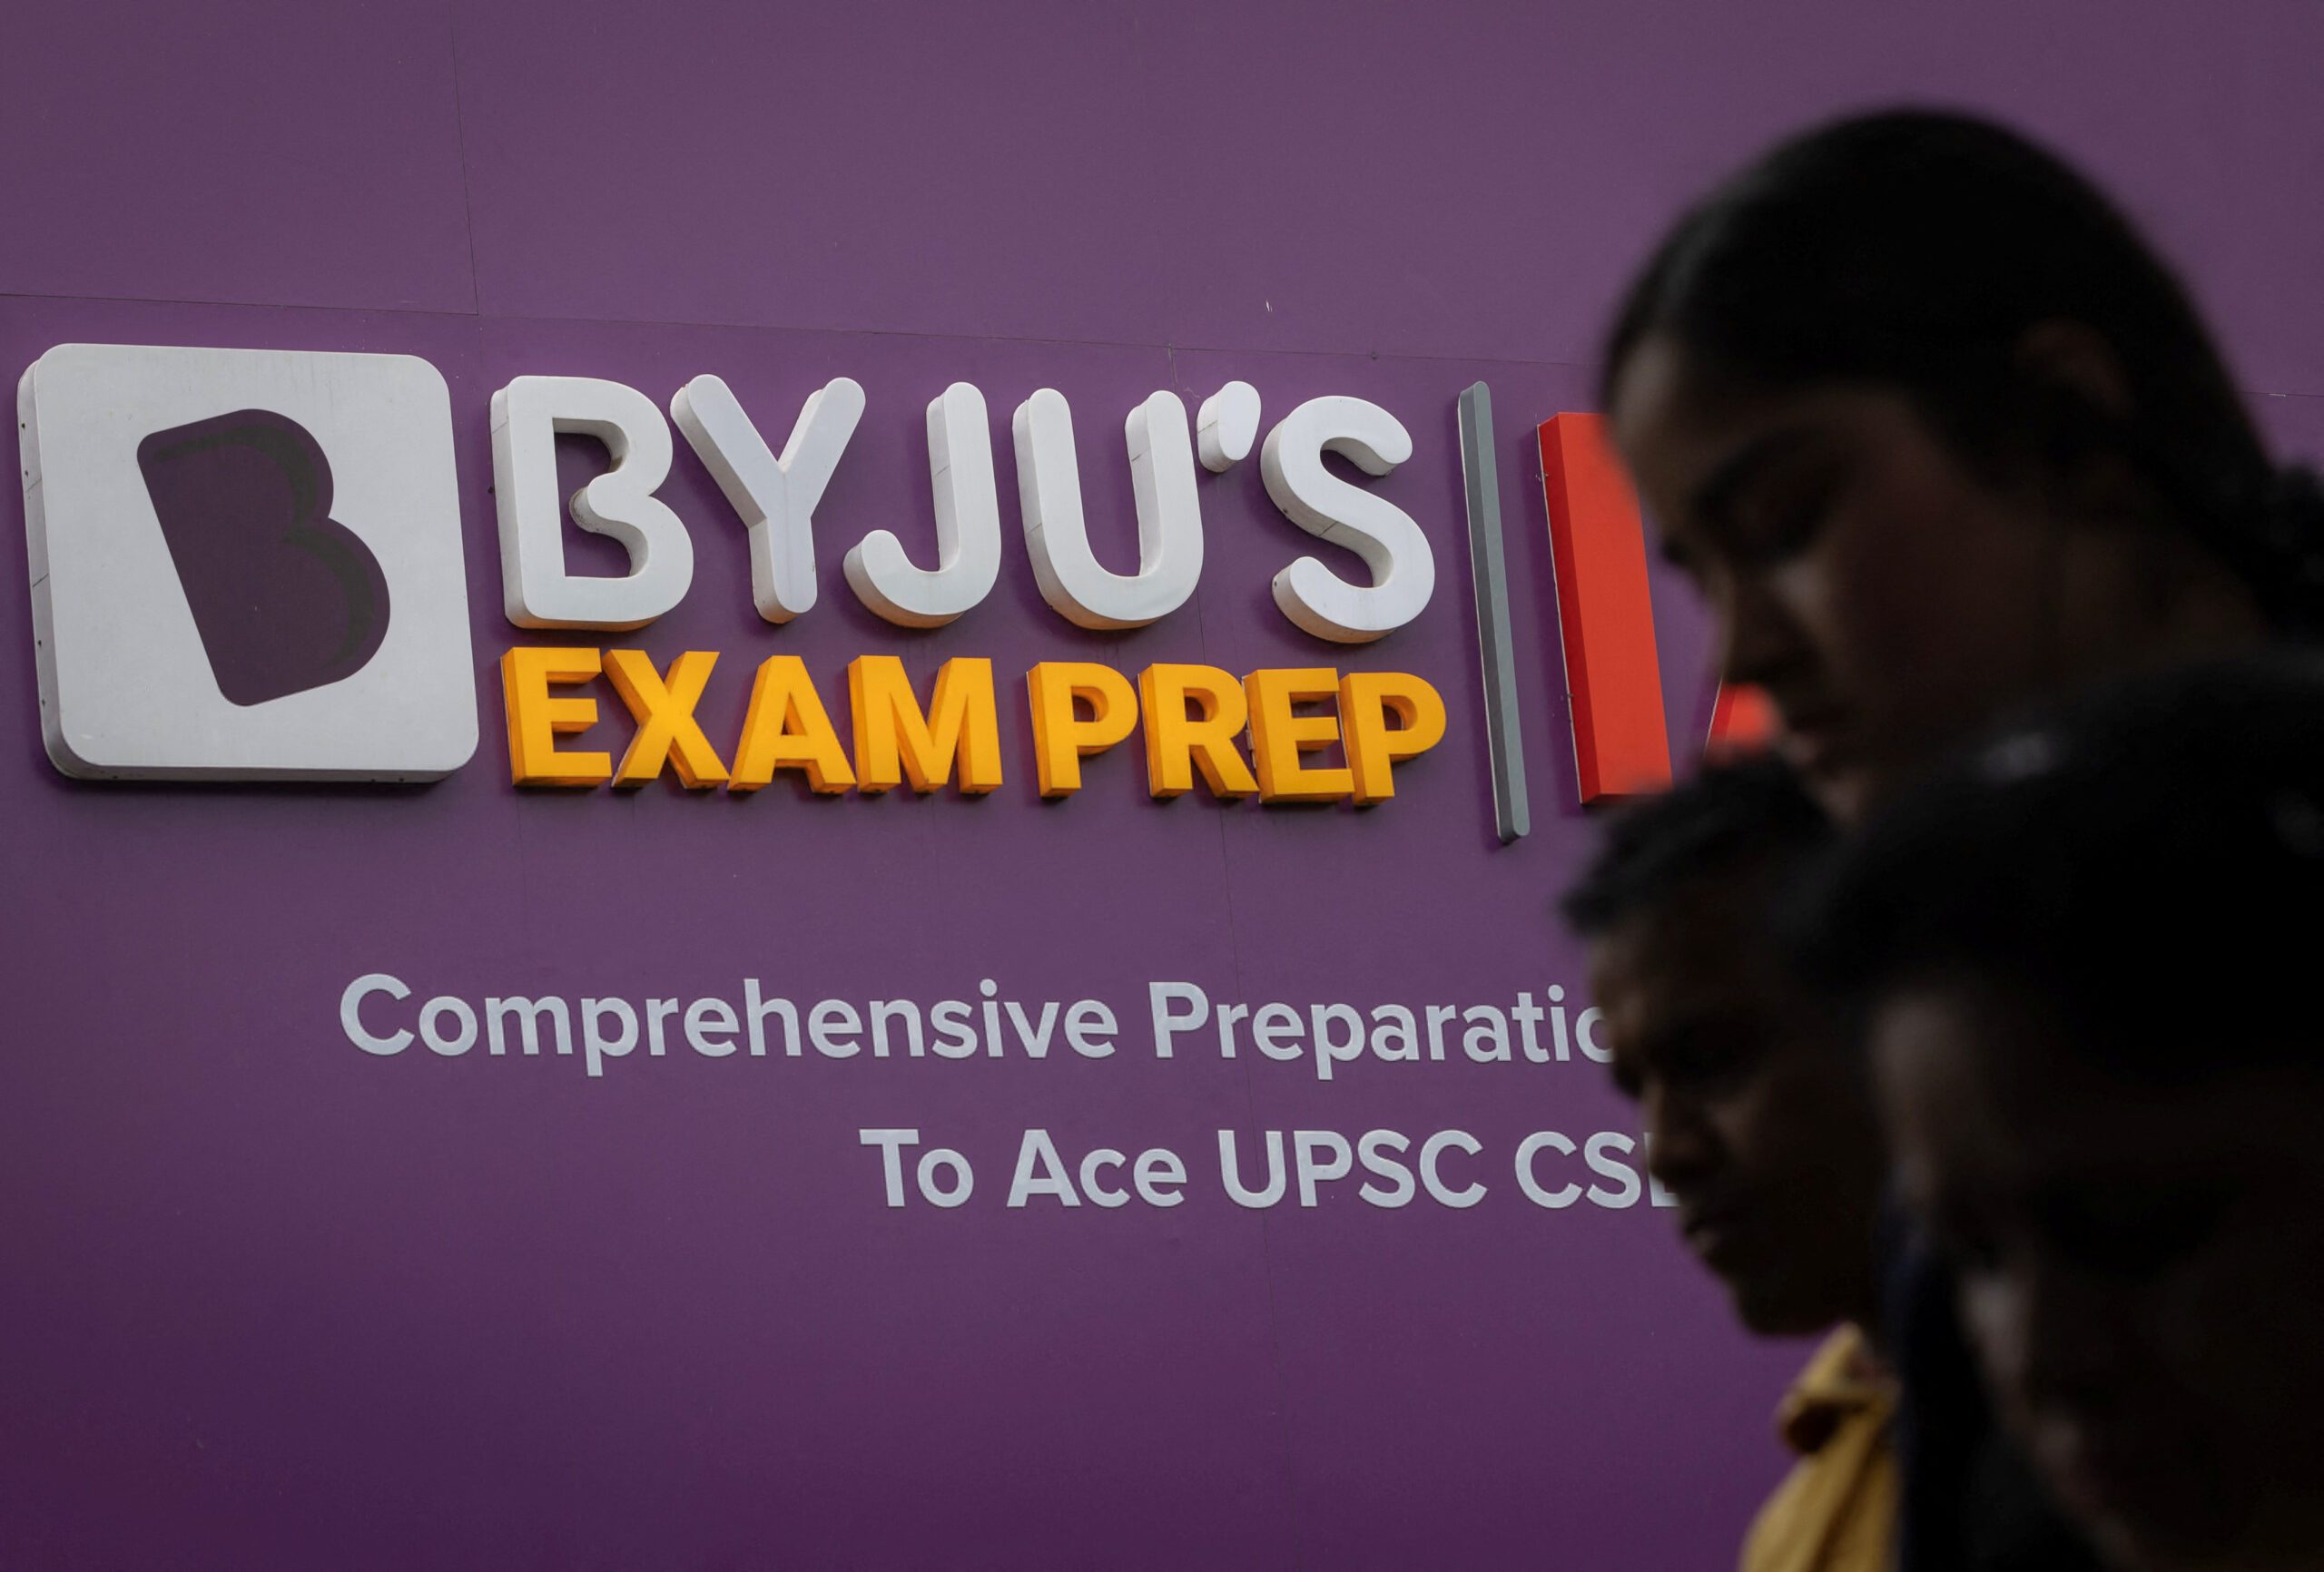 Cash-strapped Indian edtech firm BYJU’S to raise $200m through rights issue